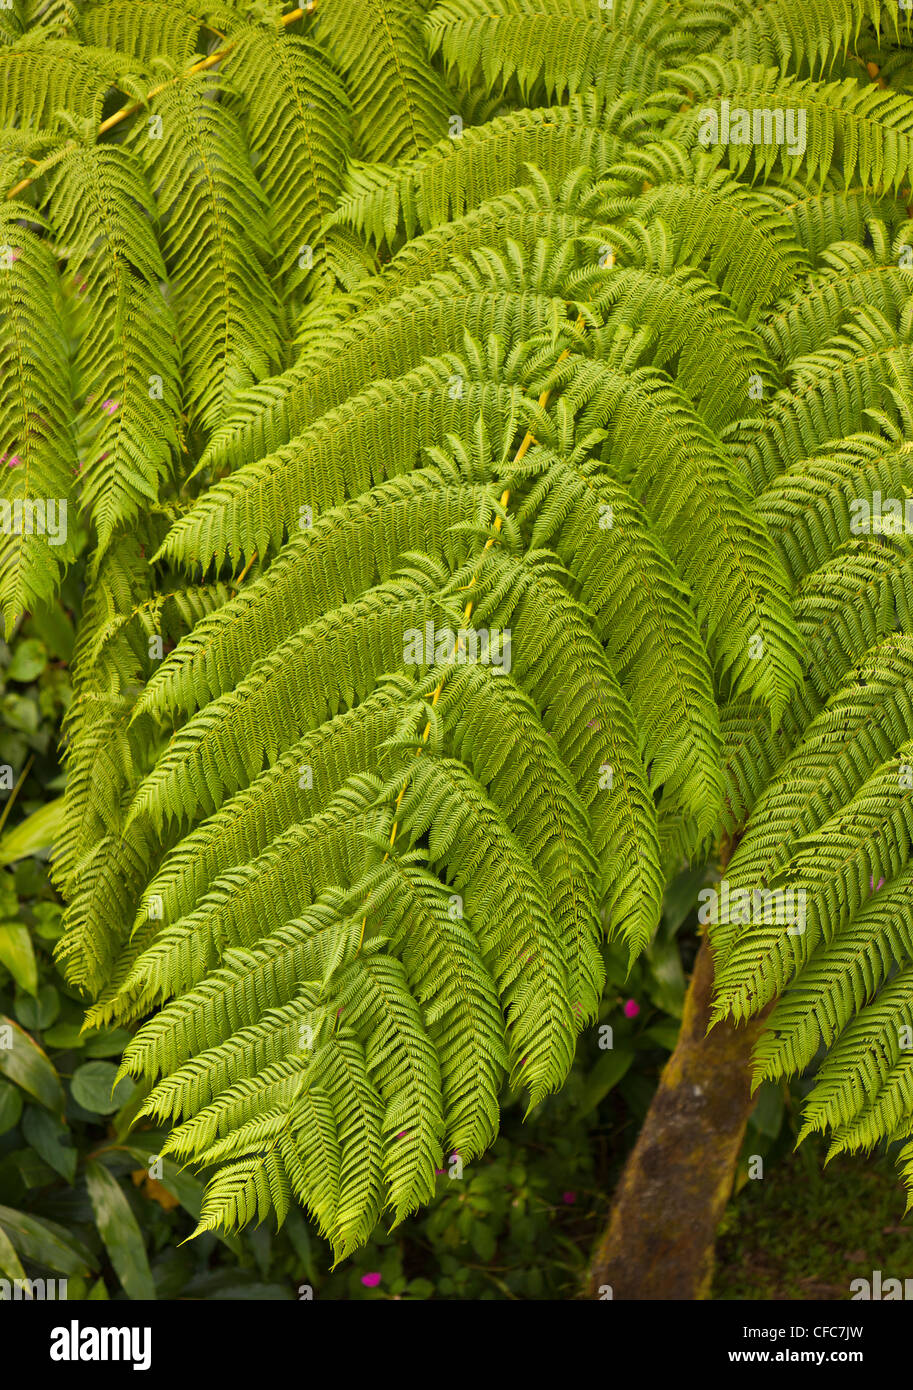 EL YUNQUE NATIONAL FOREST, PUERTO RICO - Ferns in rain forest. Stock Photo